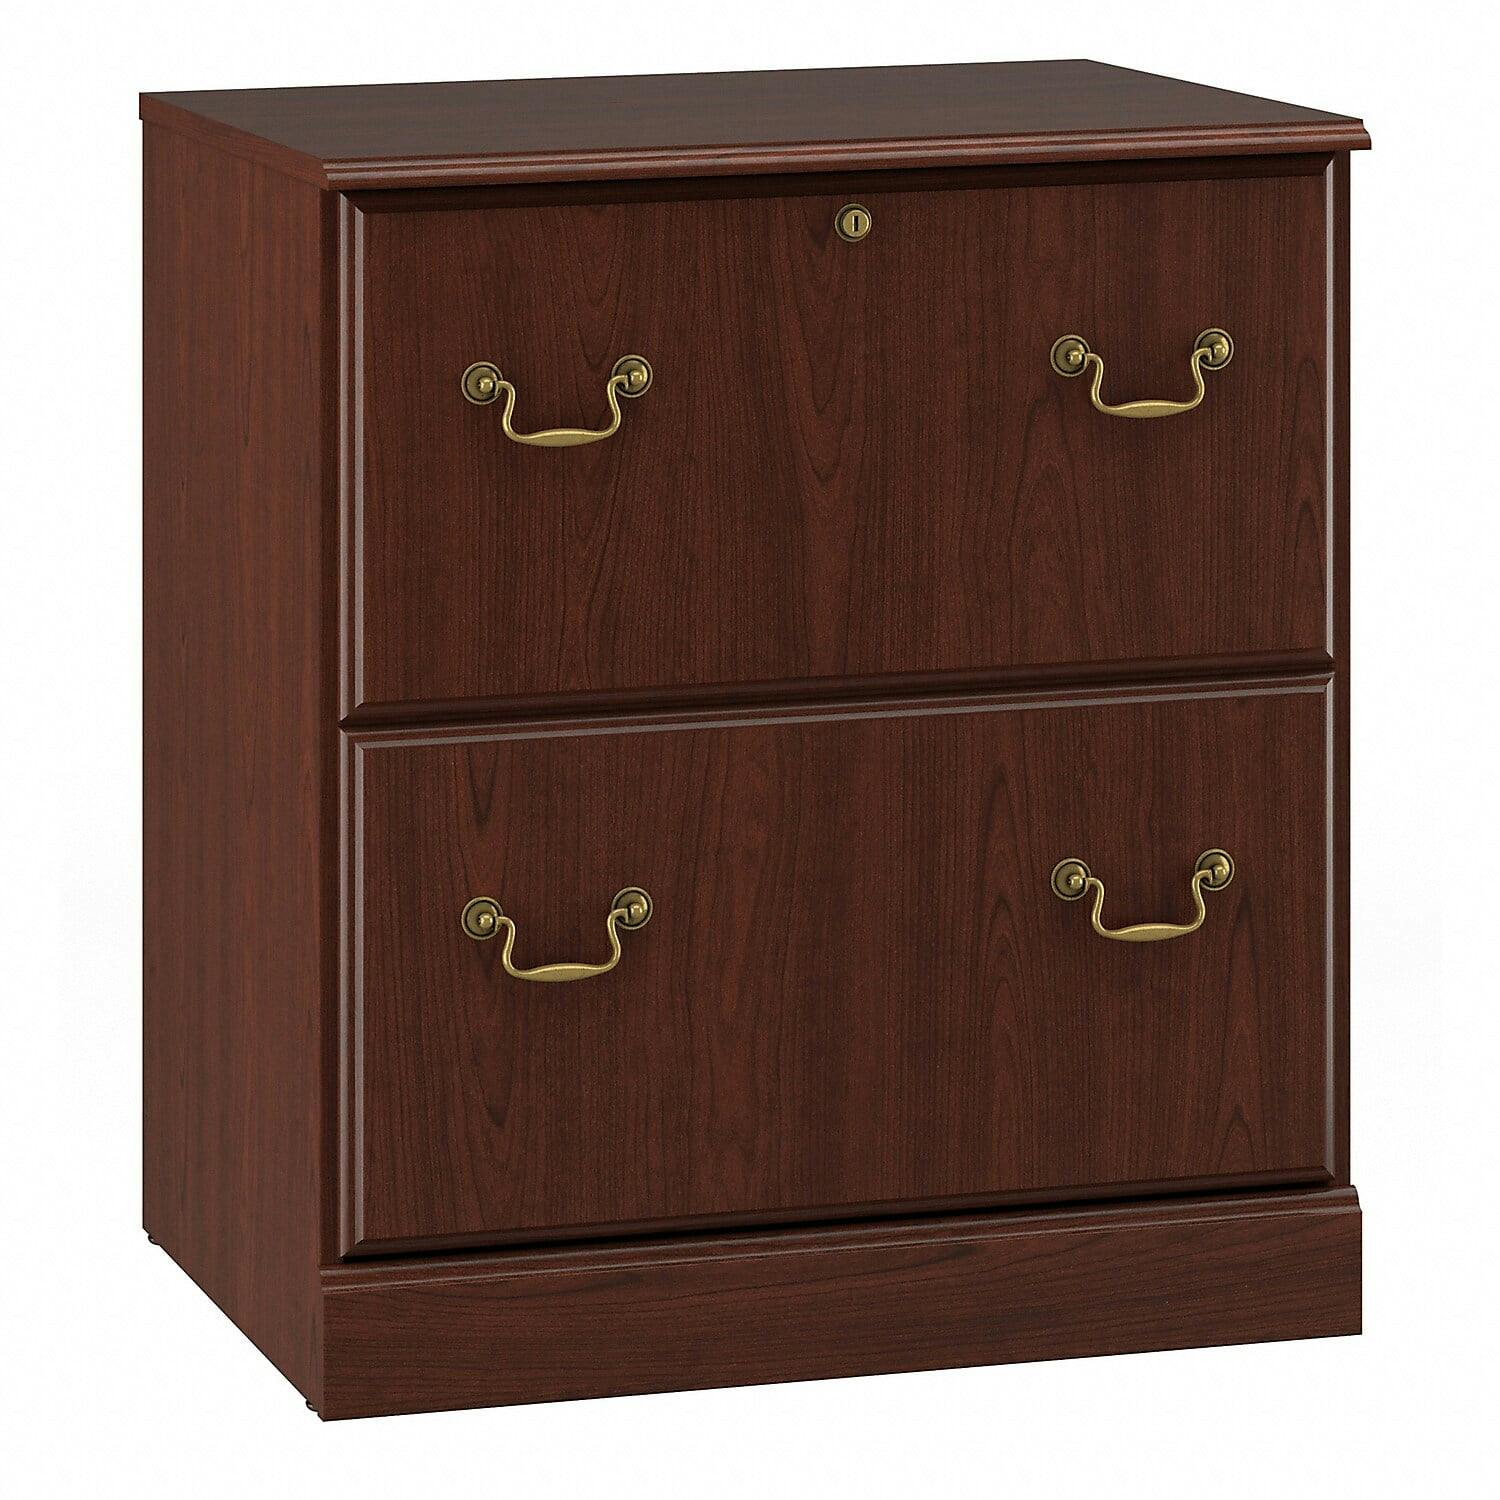 Harvest Cherry Thermally Fused Laminate 2-Drawer Lateral File Cabinet